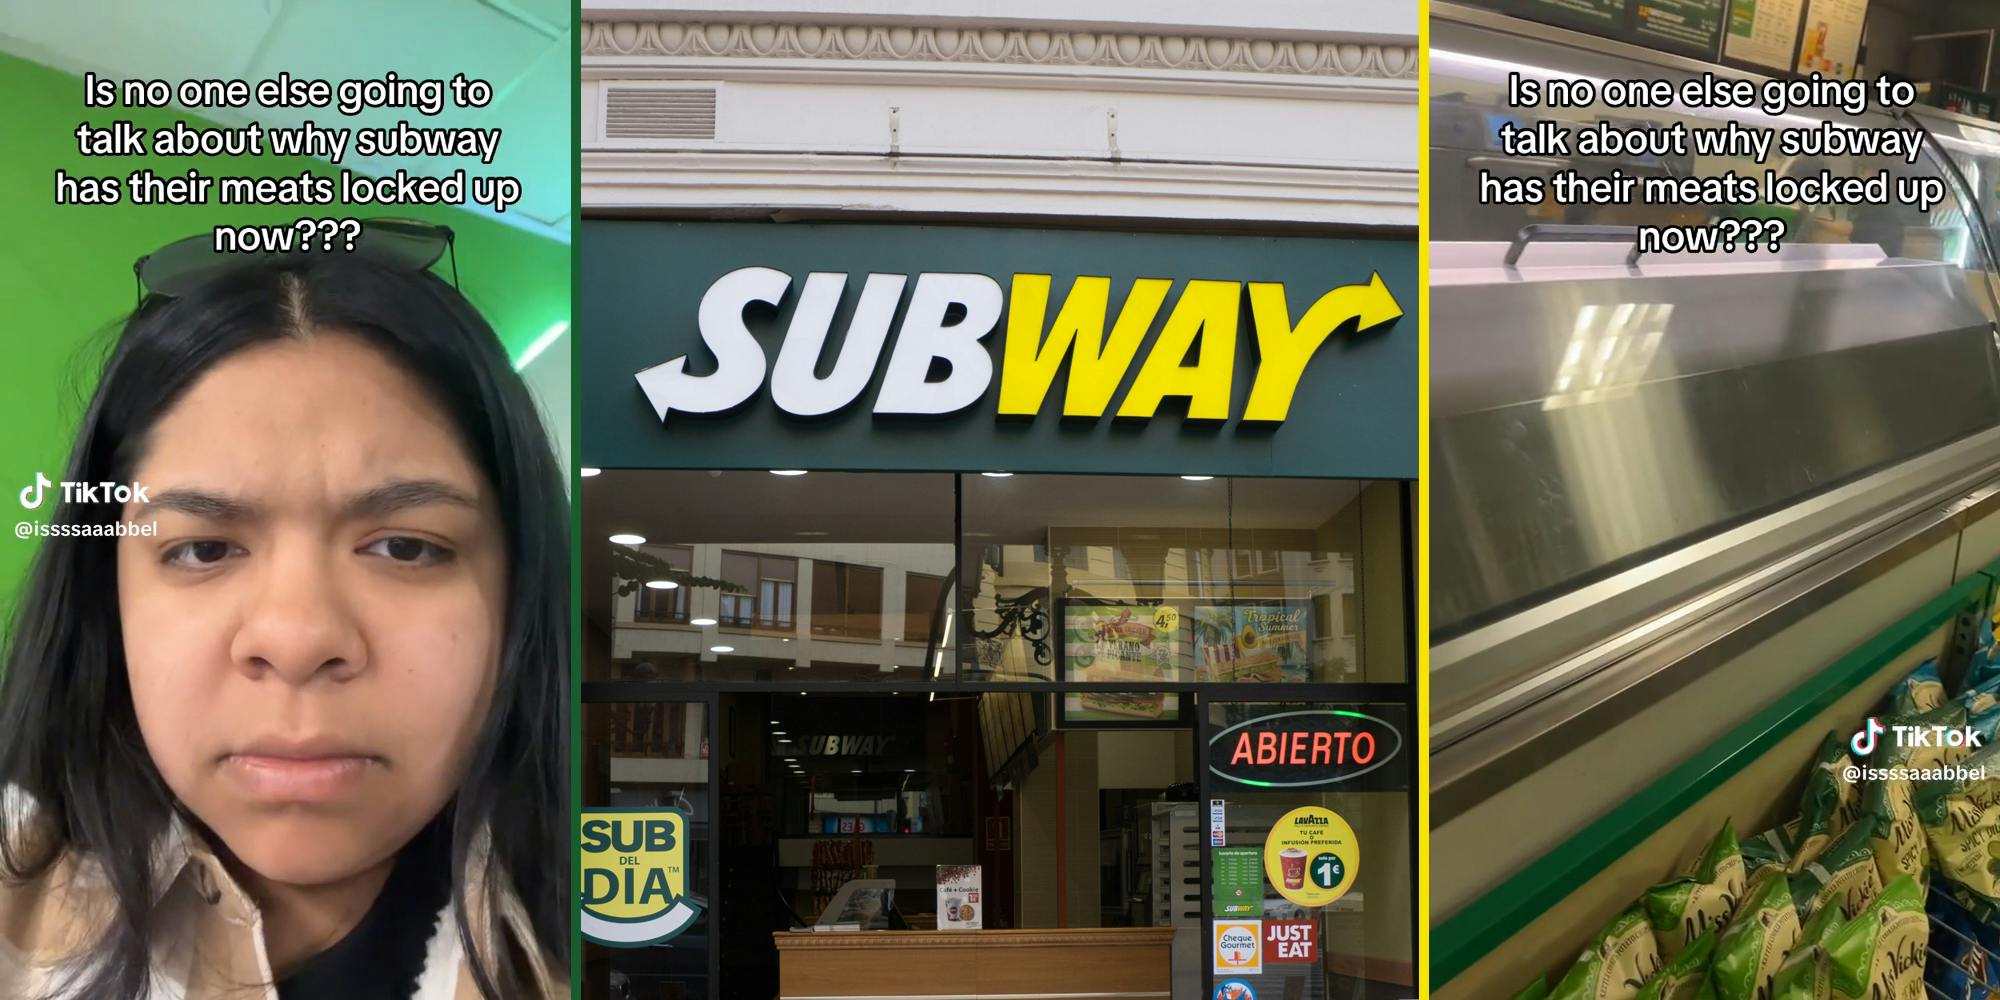 young woman in Subway with caption "is no one else going to talk about why subway has their meats locked up now???" (l) Subway storefront (c) Subway counter (r)